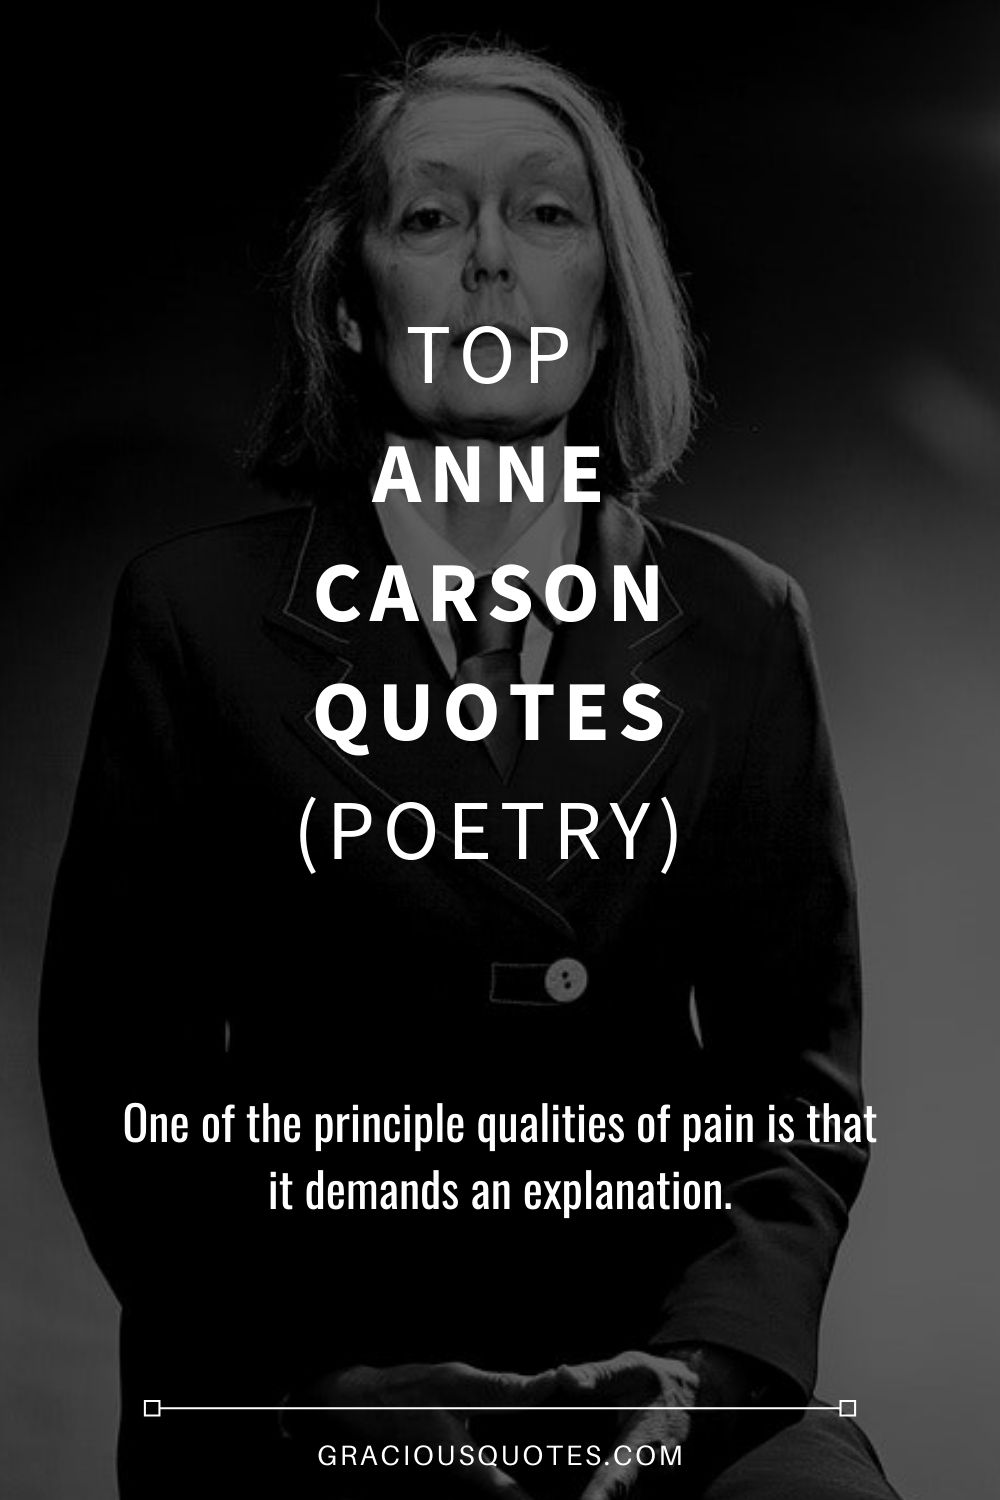 Top Anne Carson Quotes (POETRY) - Gracious Quotes